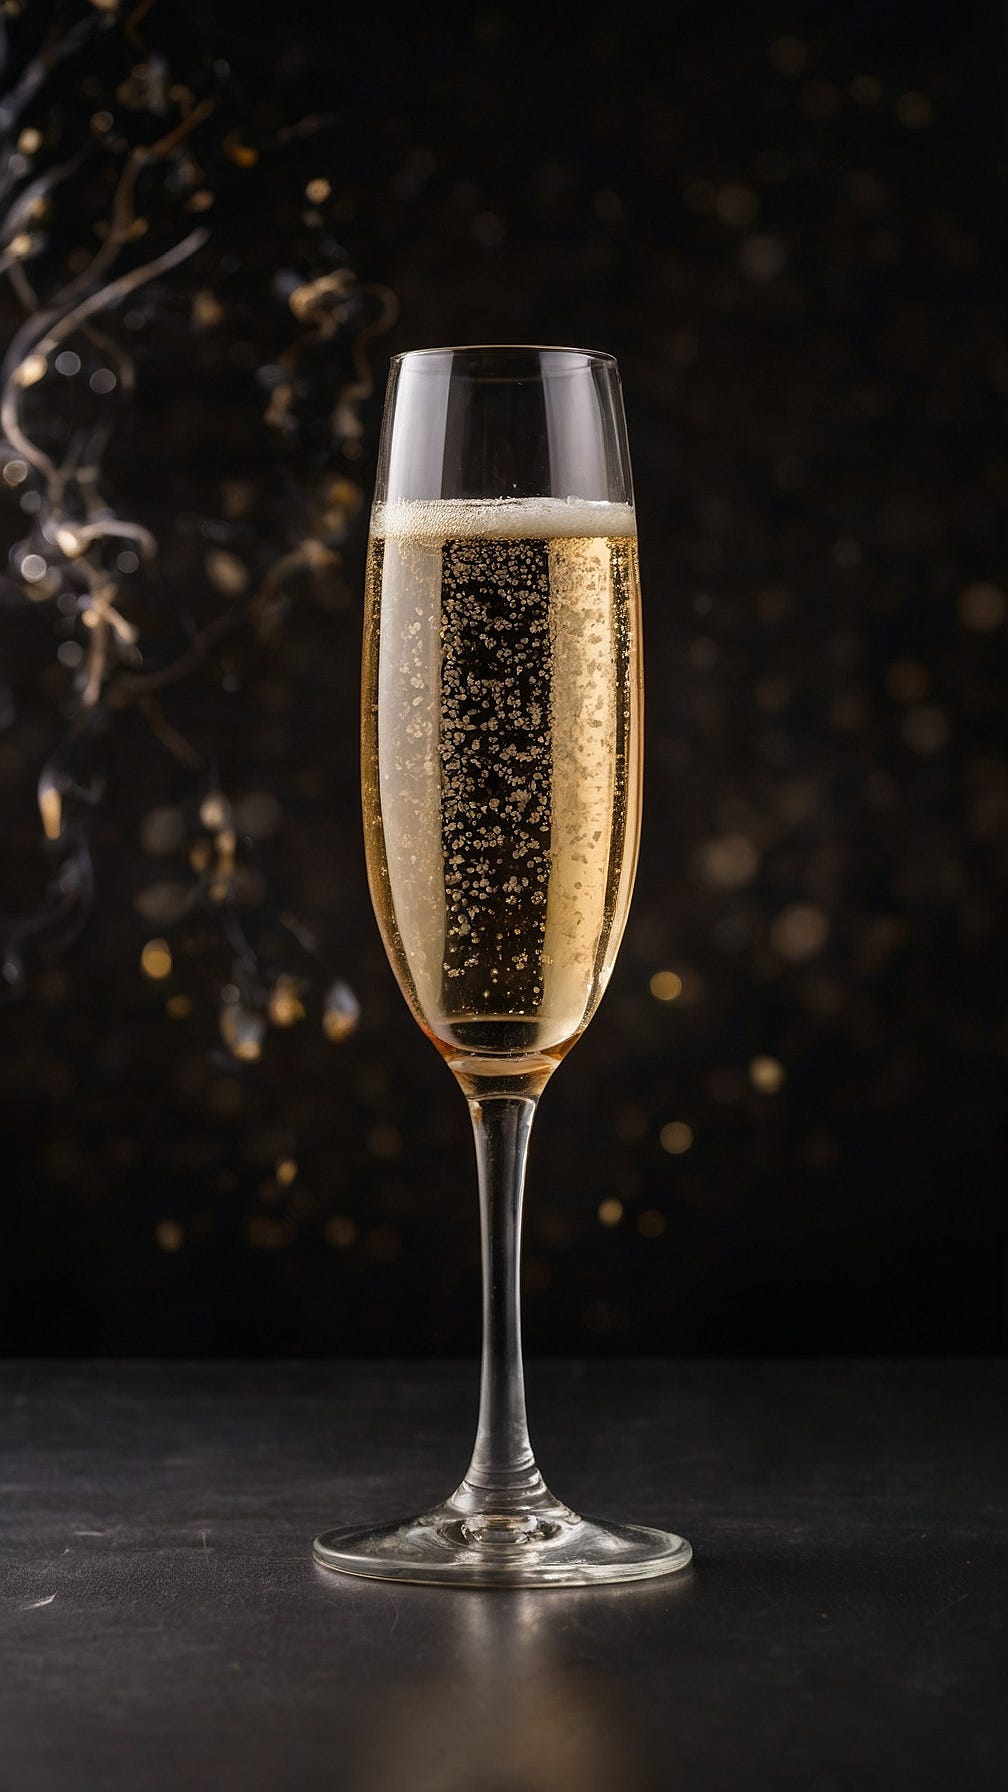 Product photoshoot of a cup of champaign, luxury, classy